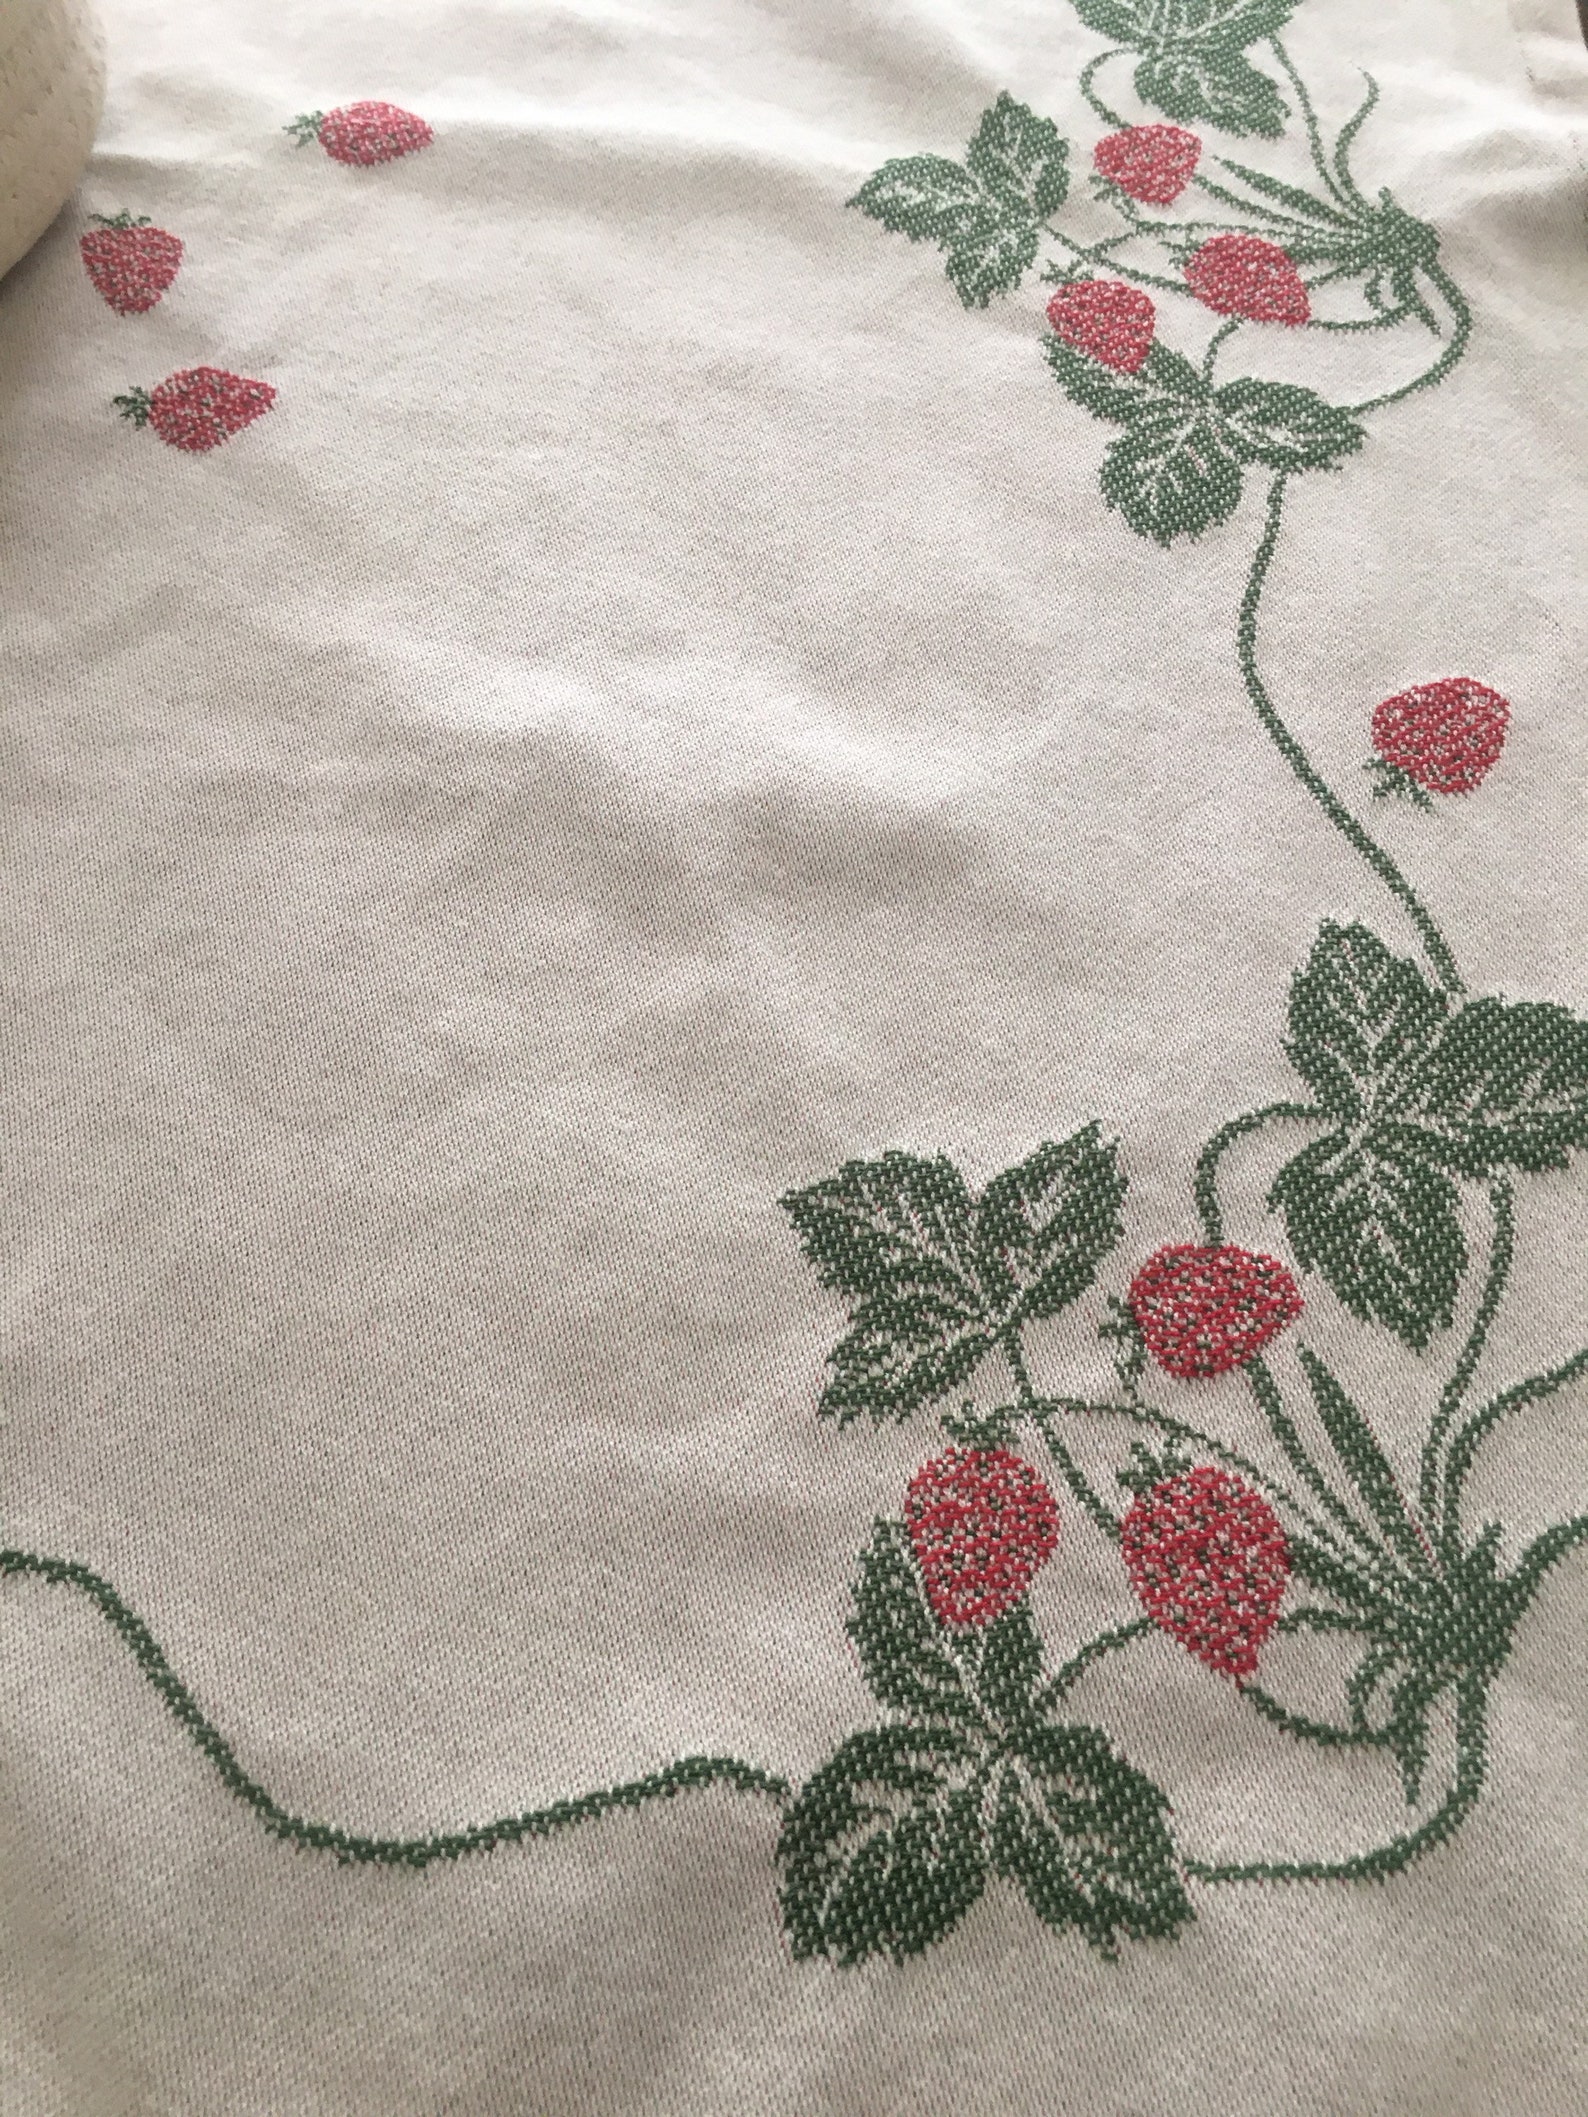 Strawberry Strawberries Tablecloth Cottagecore Country | Etsy